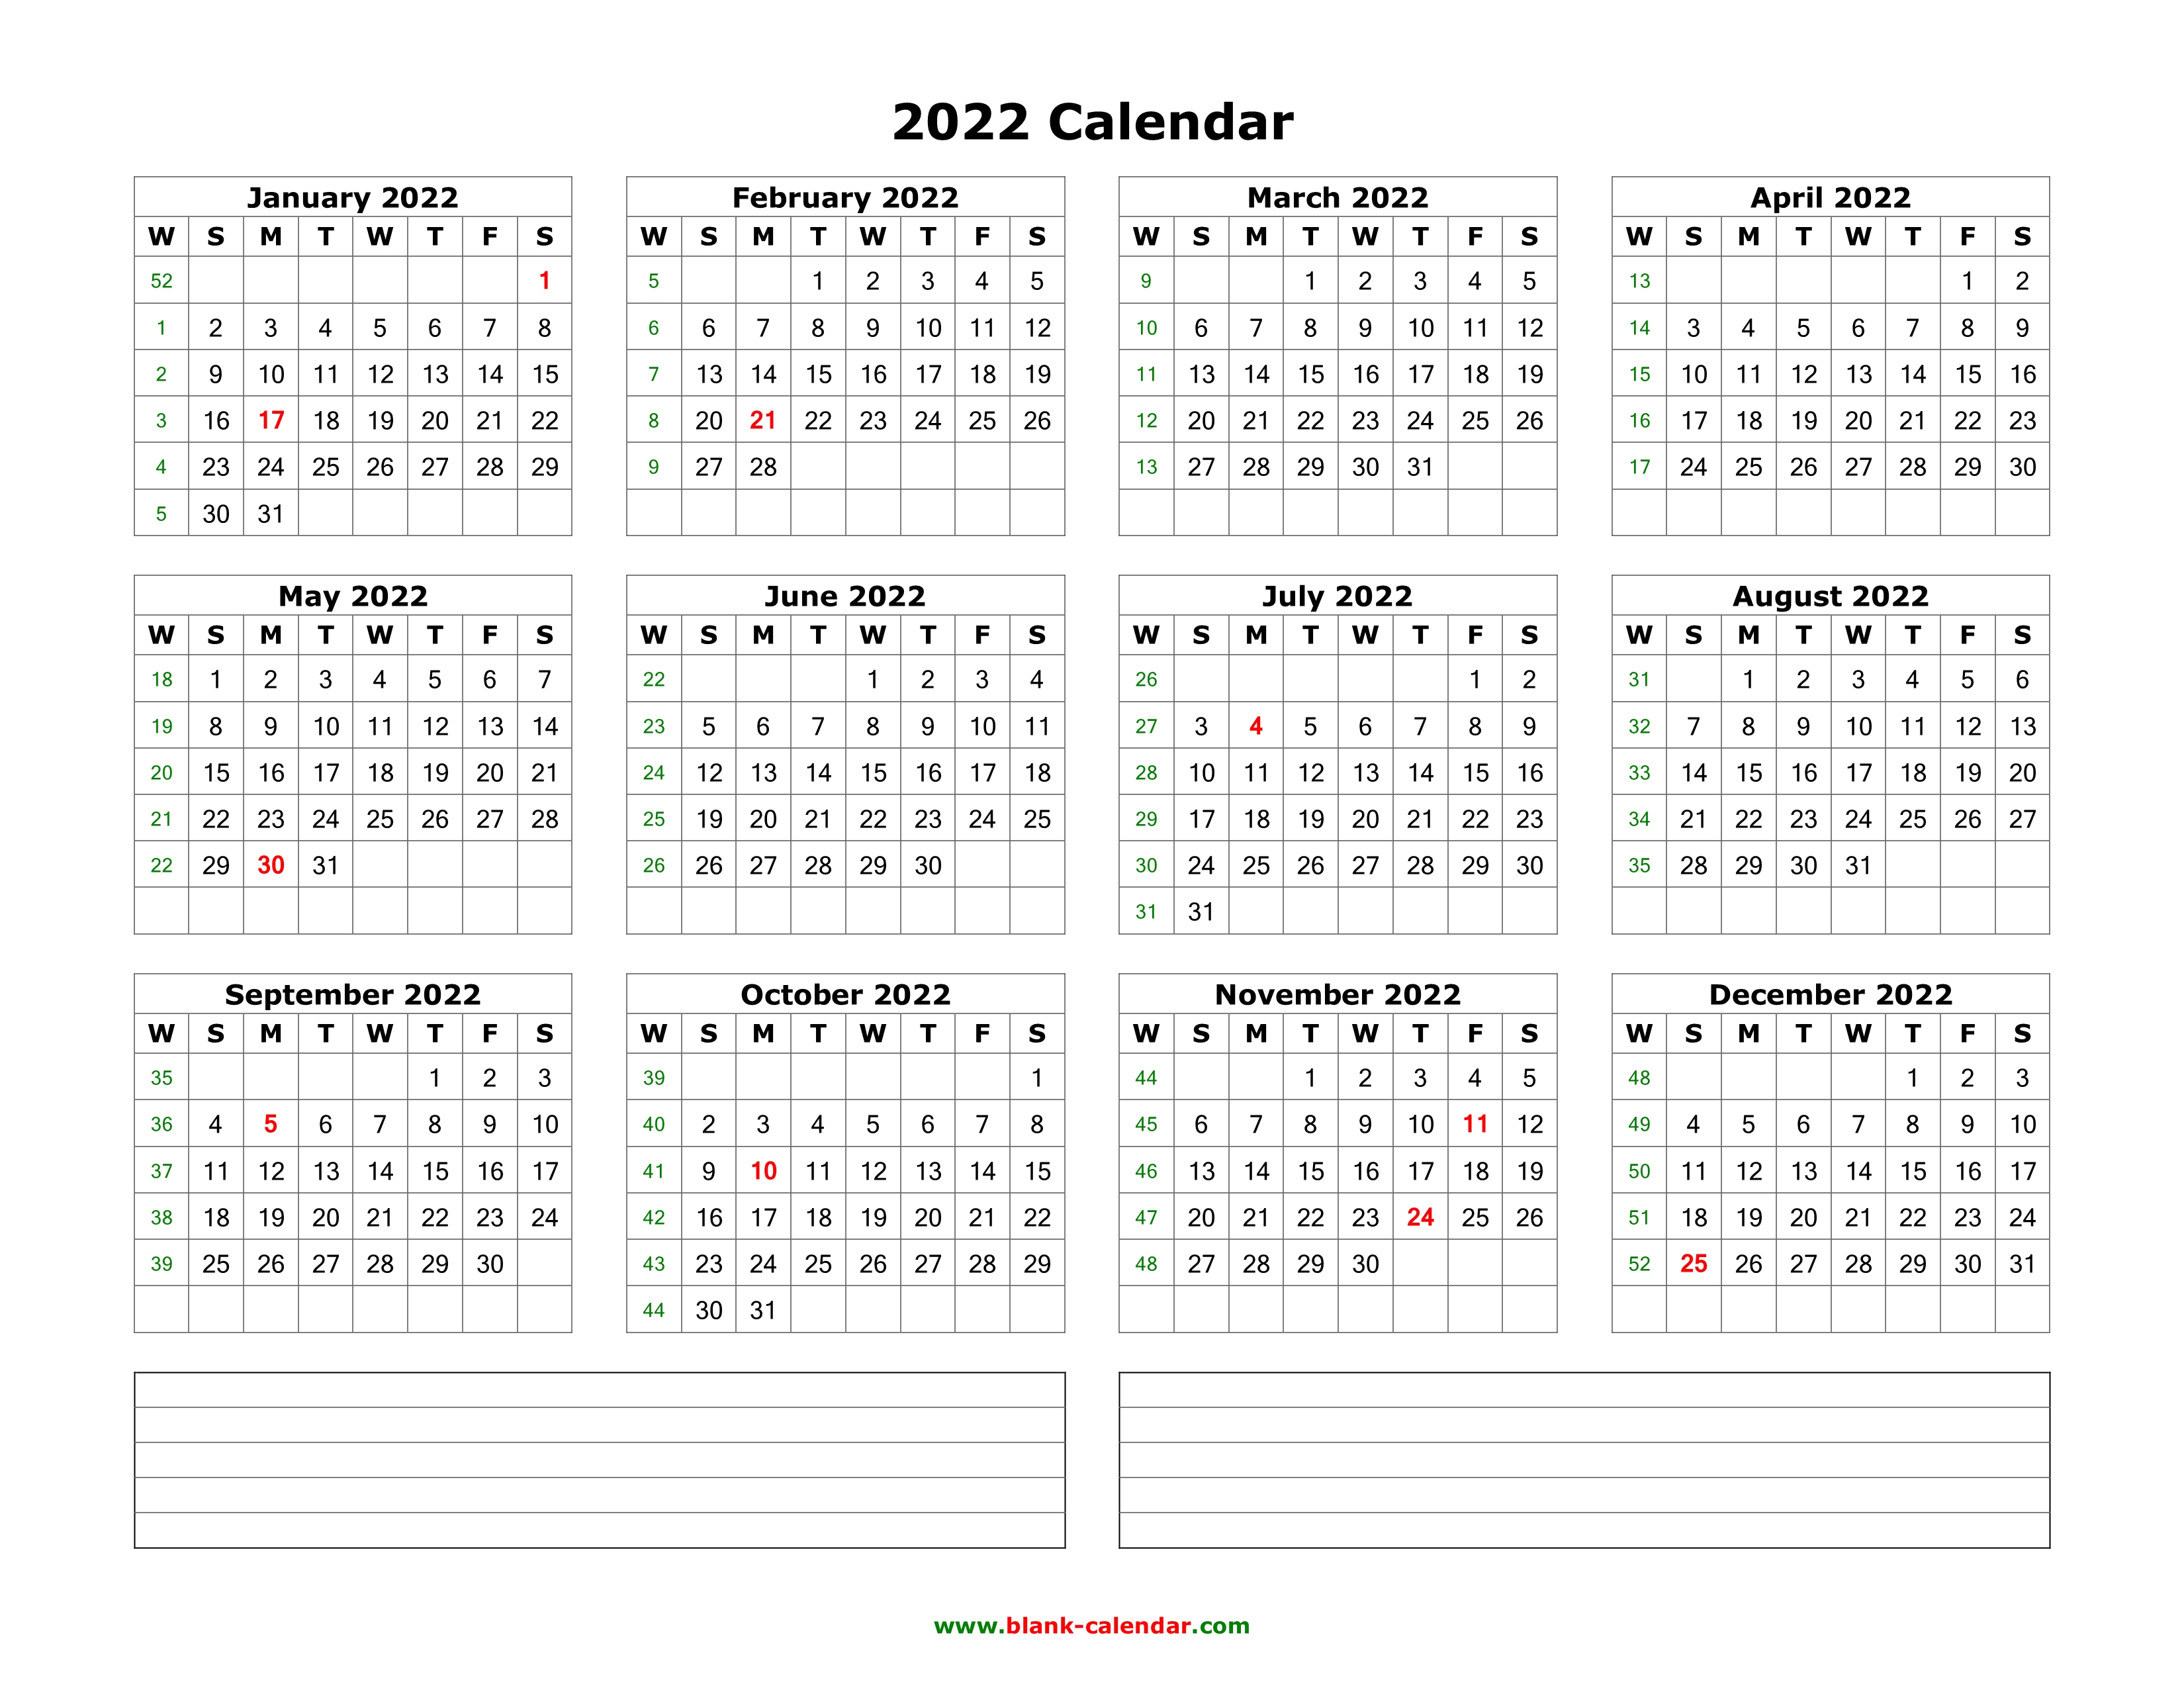 Download Blank Calendar 2022 With Space For Notes (12 Months On One Page, Horizontal)